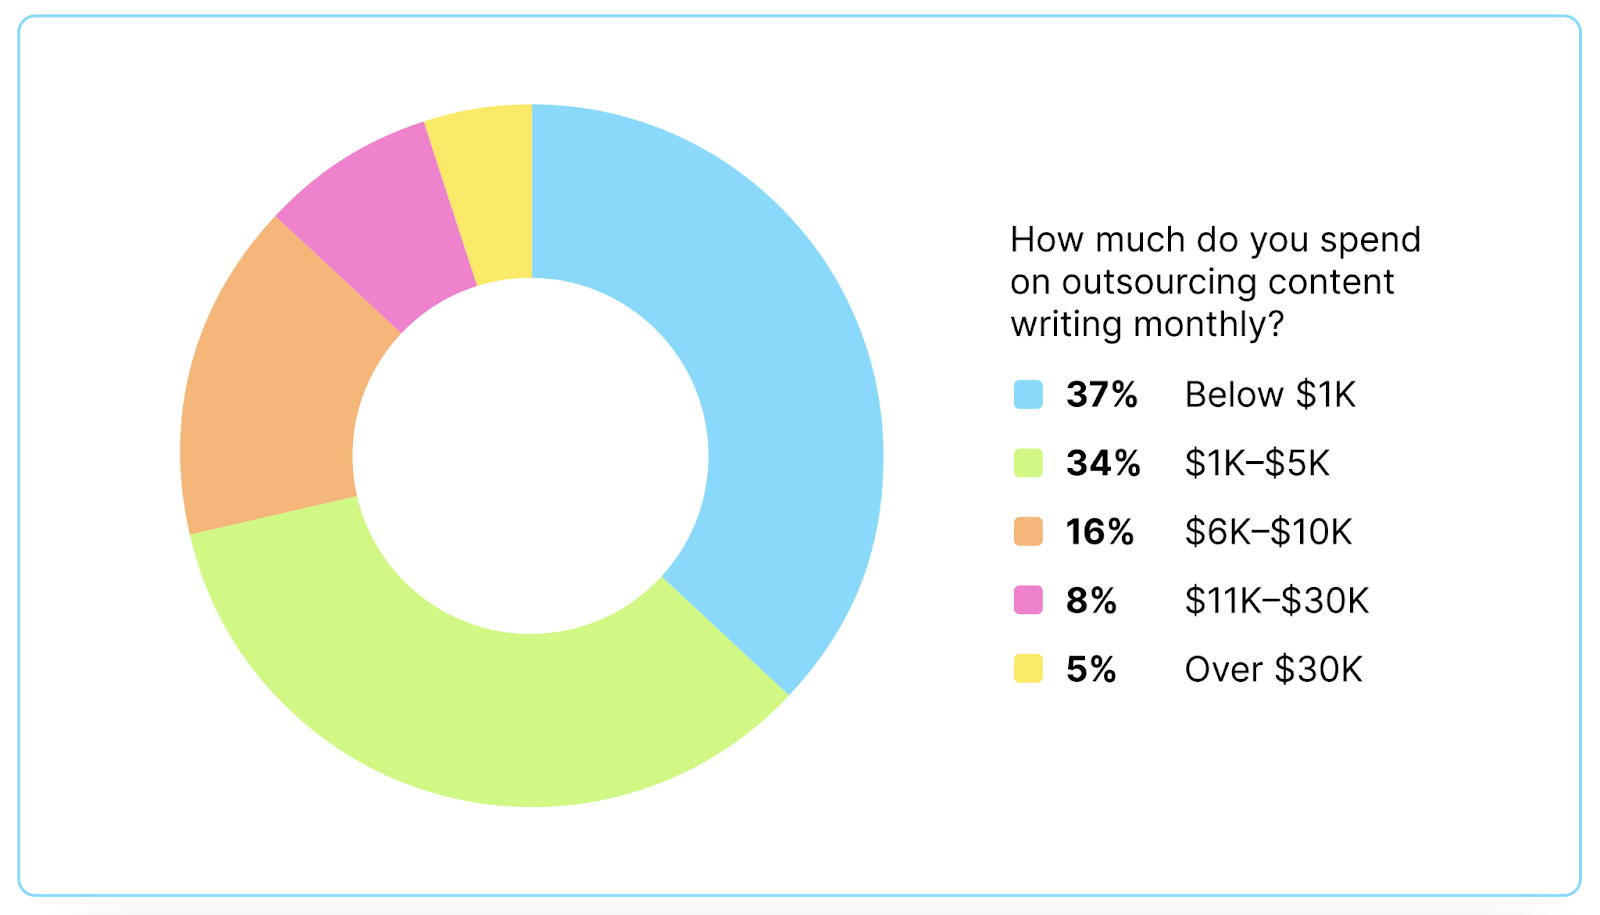 Thirty-seven percent of businesses spend below $1,000 on outsourced content each month, thirty-four percent of businesses spend $1,000 to $5,000, while five percent spend over $30k